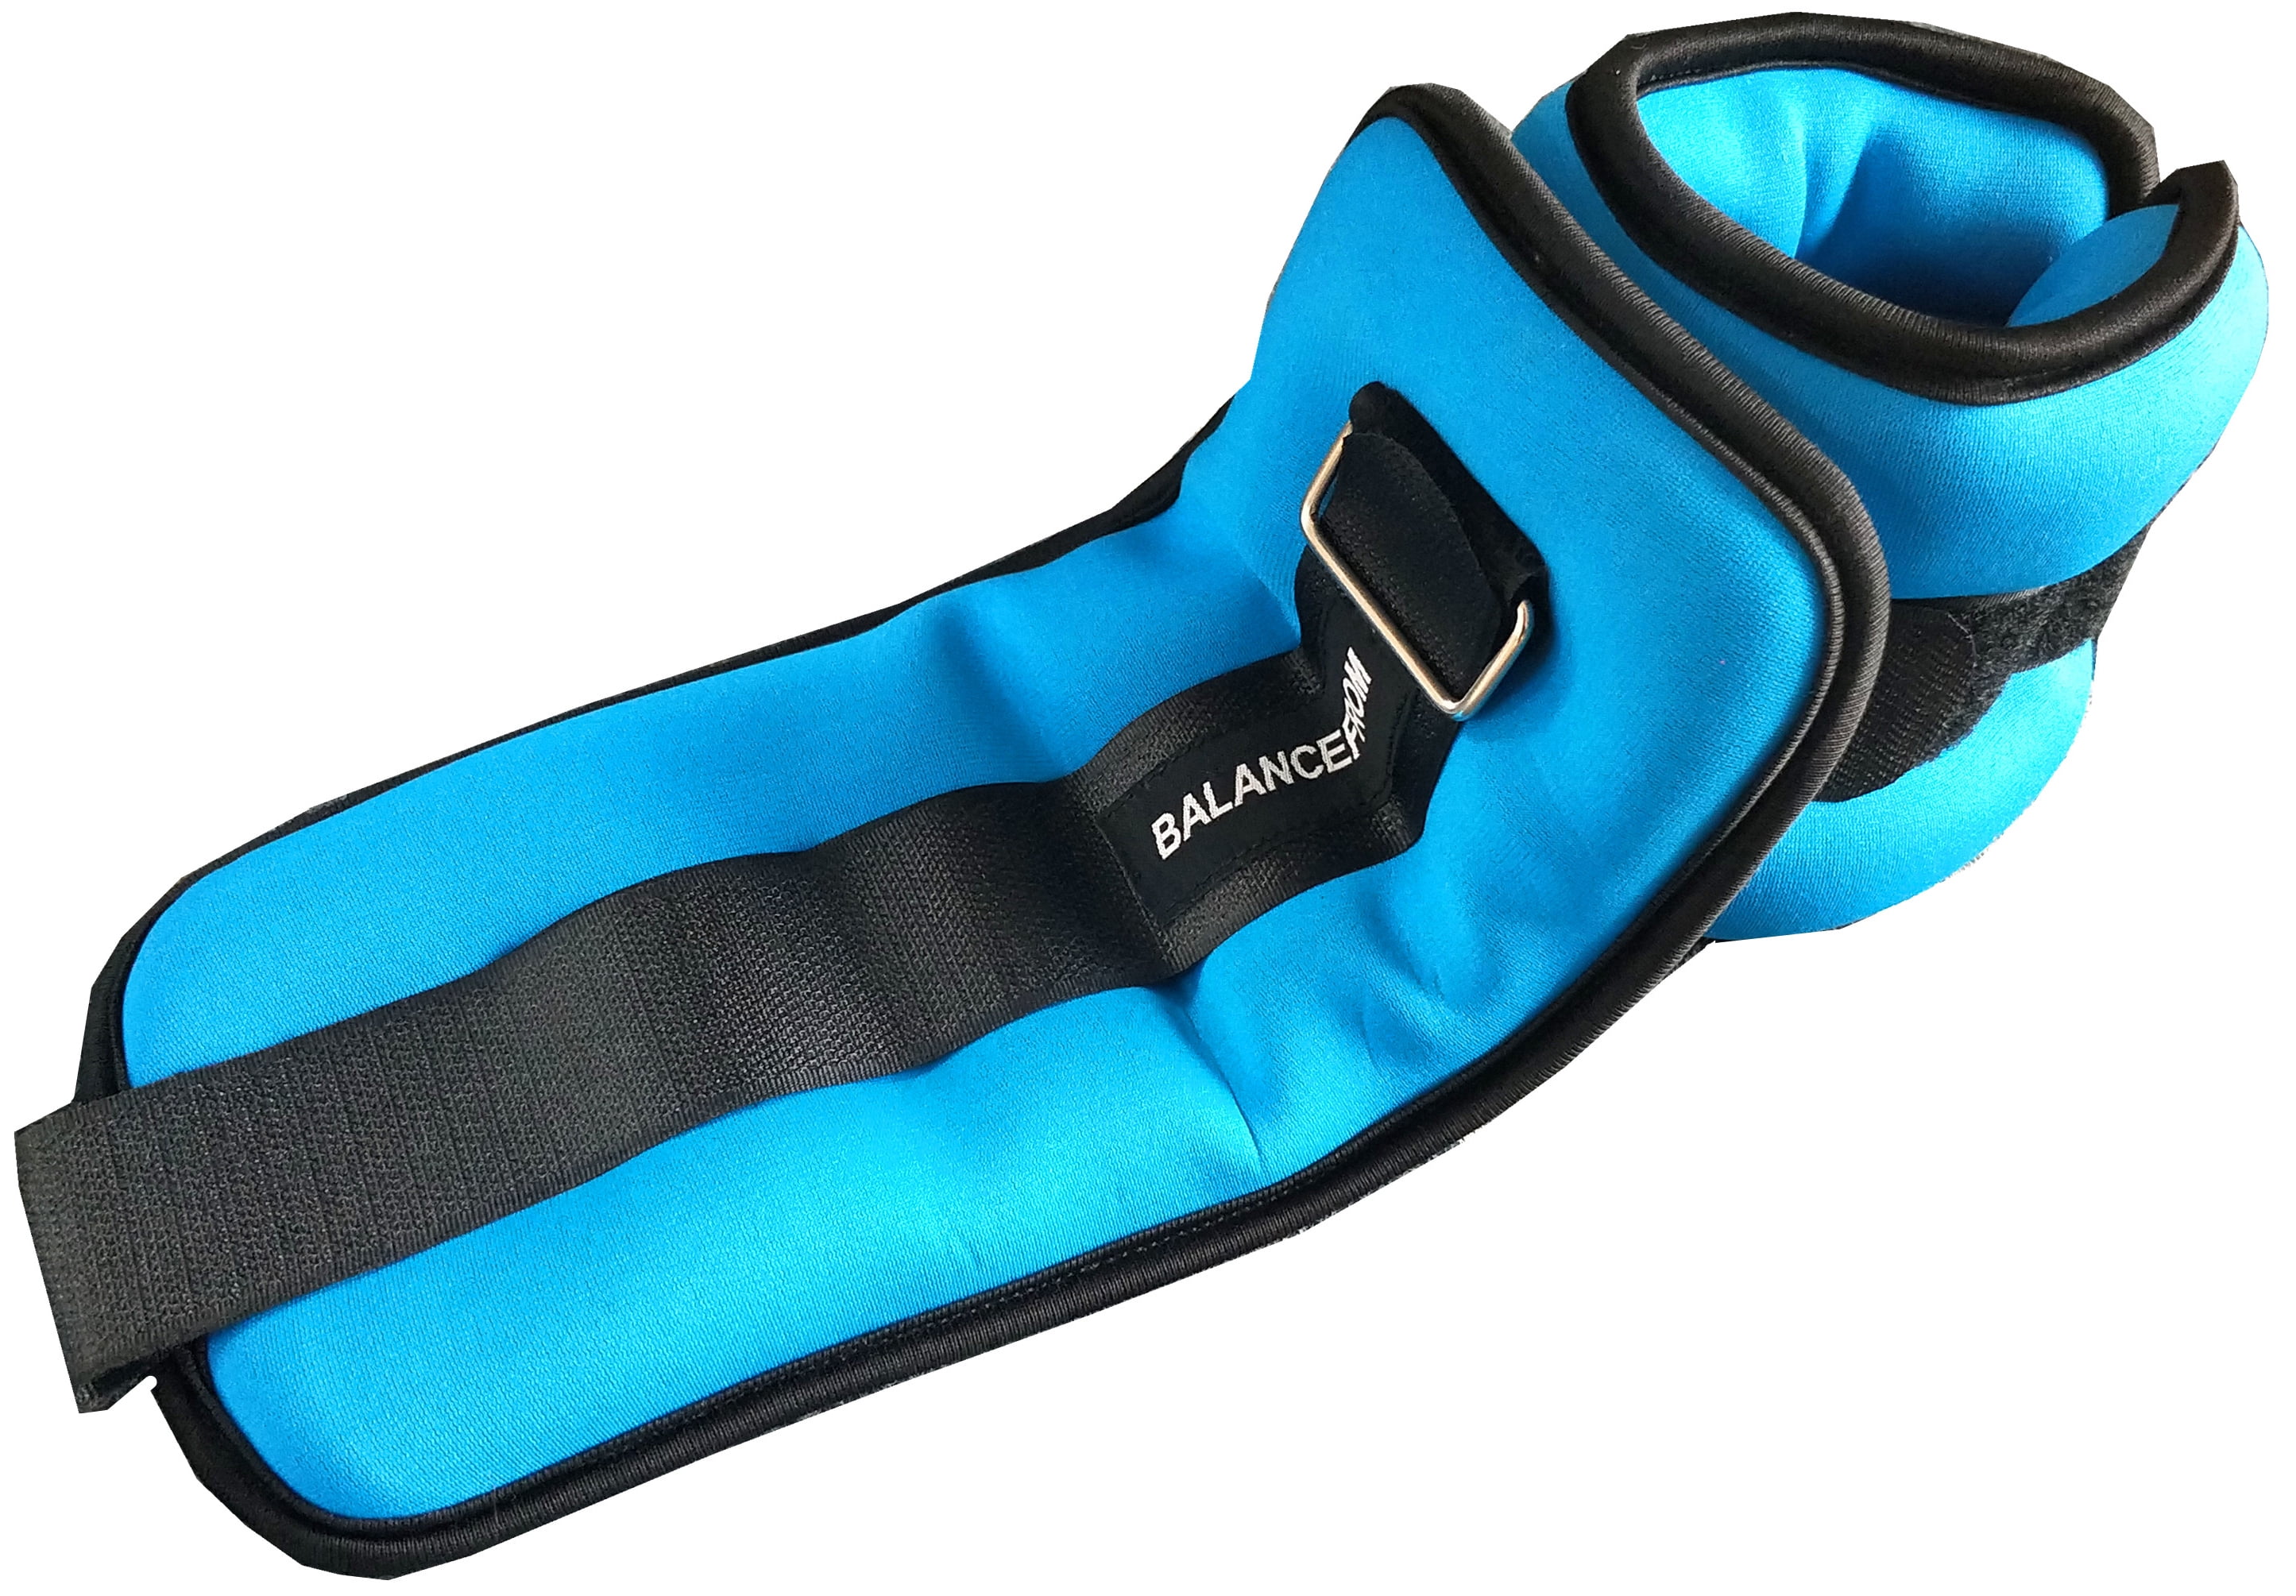 BalanceFrom 15 lbs Fully Adjustable Ankle Wrist Arm Leg Weights w  Adjustable Strap, Pair Adjusts 0.5-7.5 lbs Each 